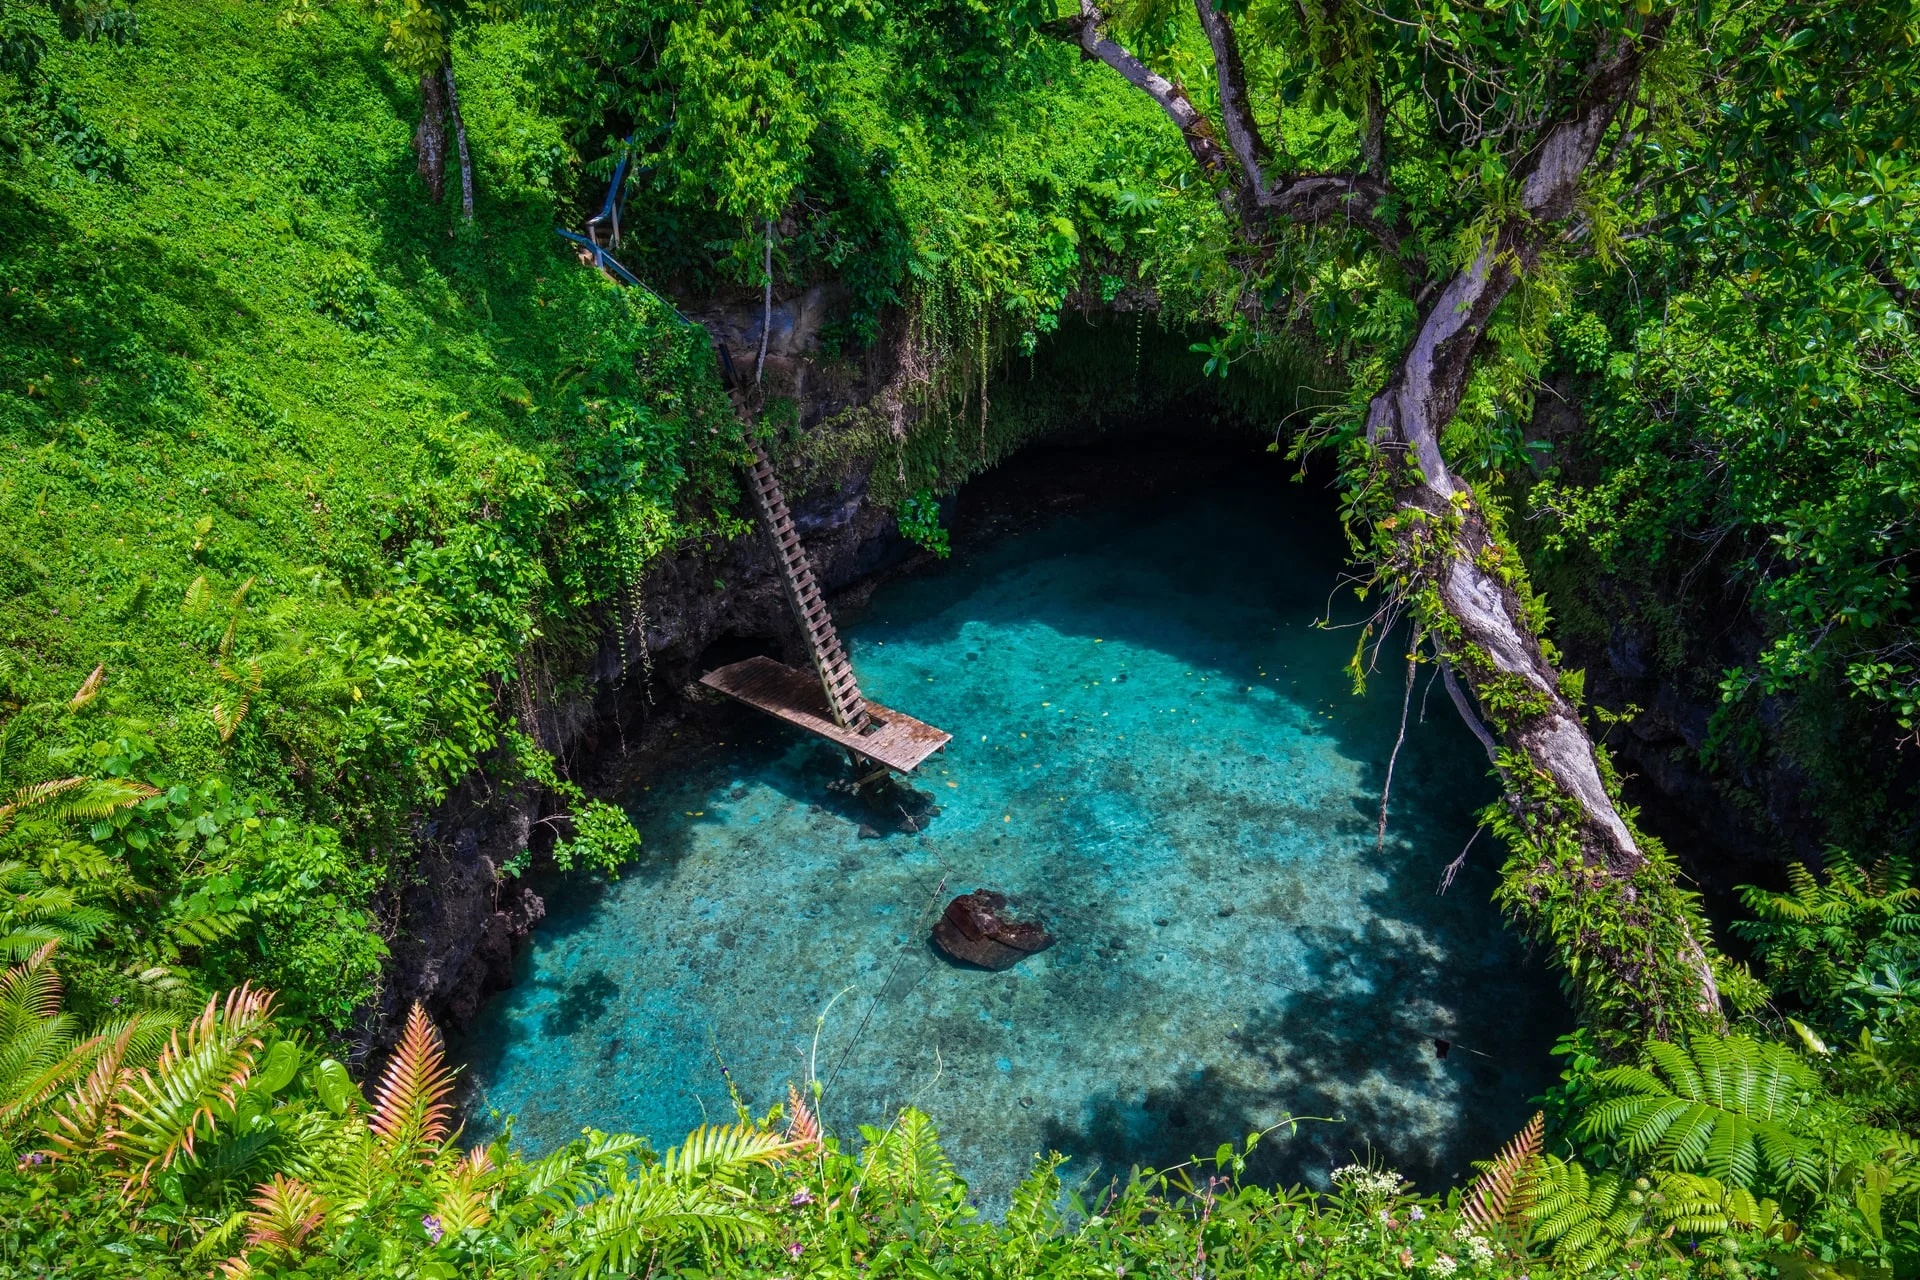 A blue pool in the middle of a green jungle.